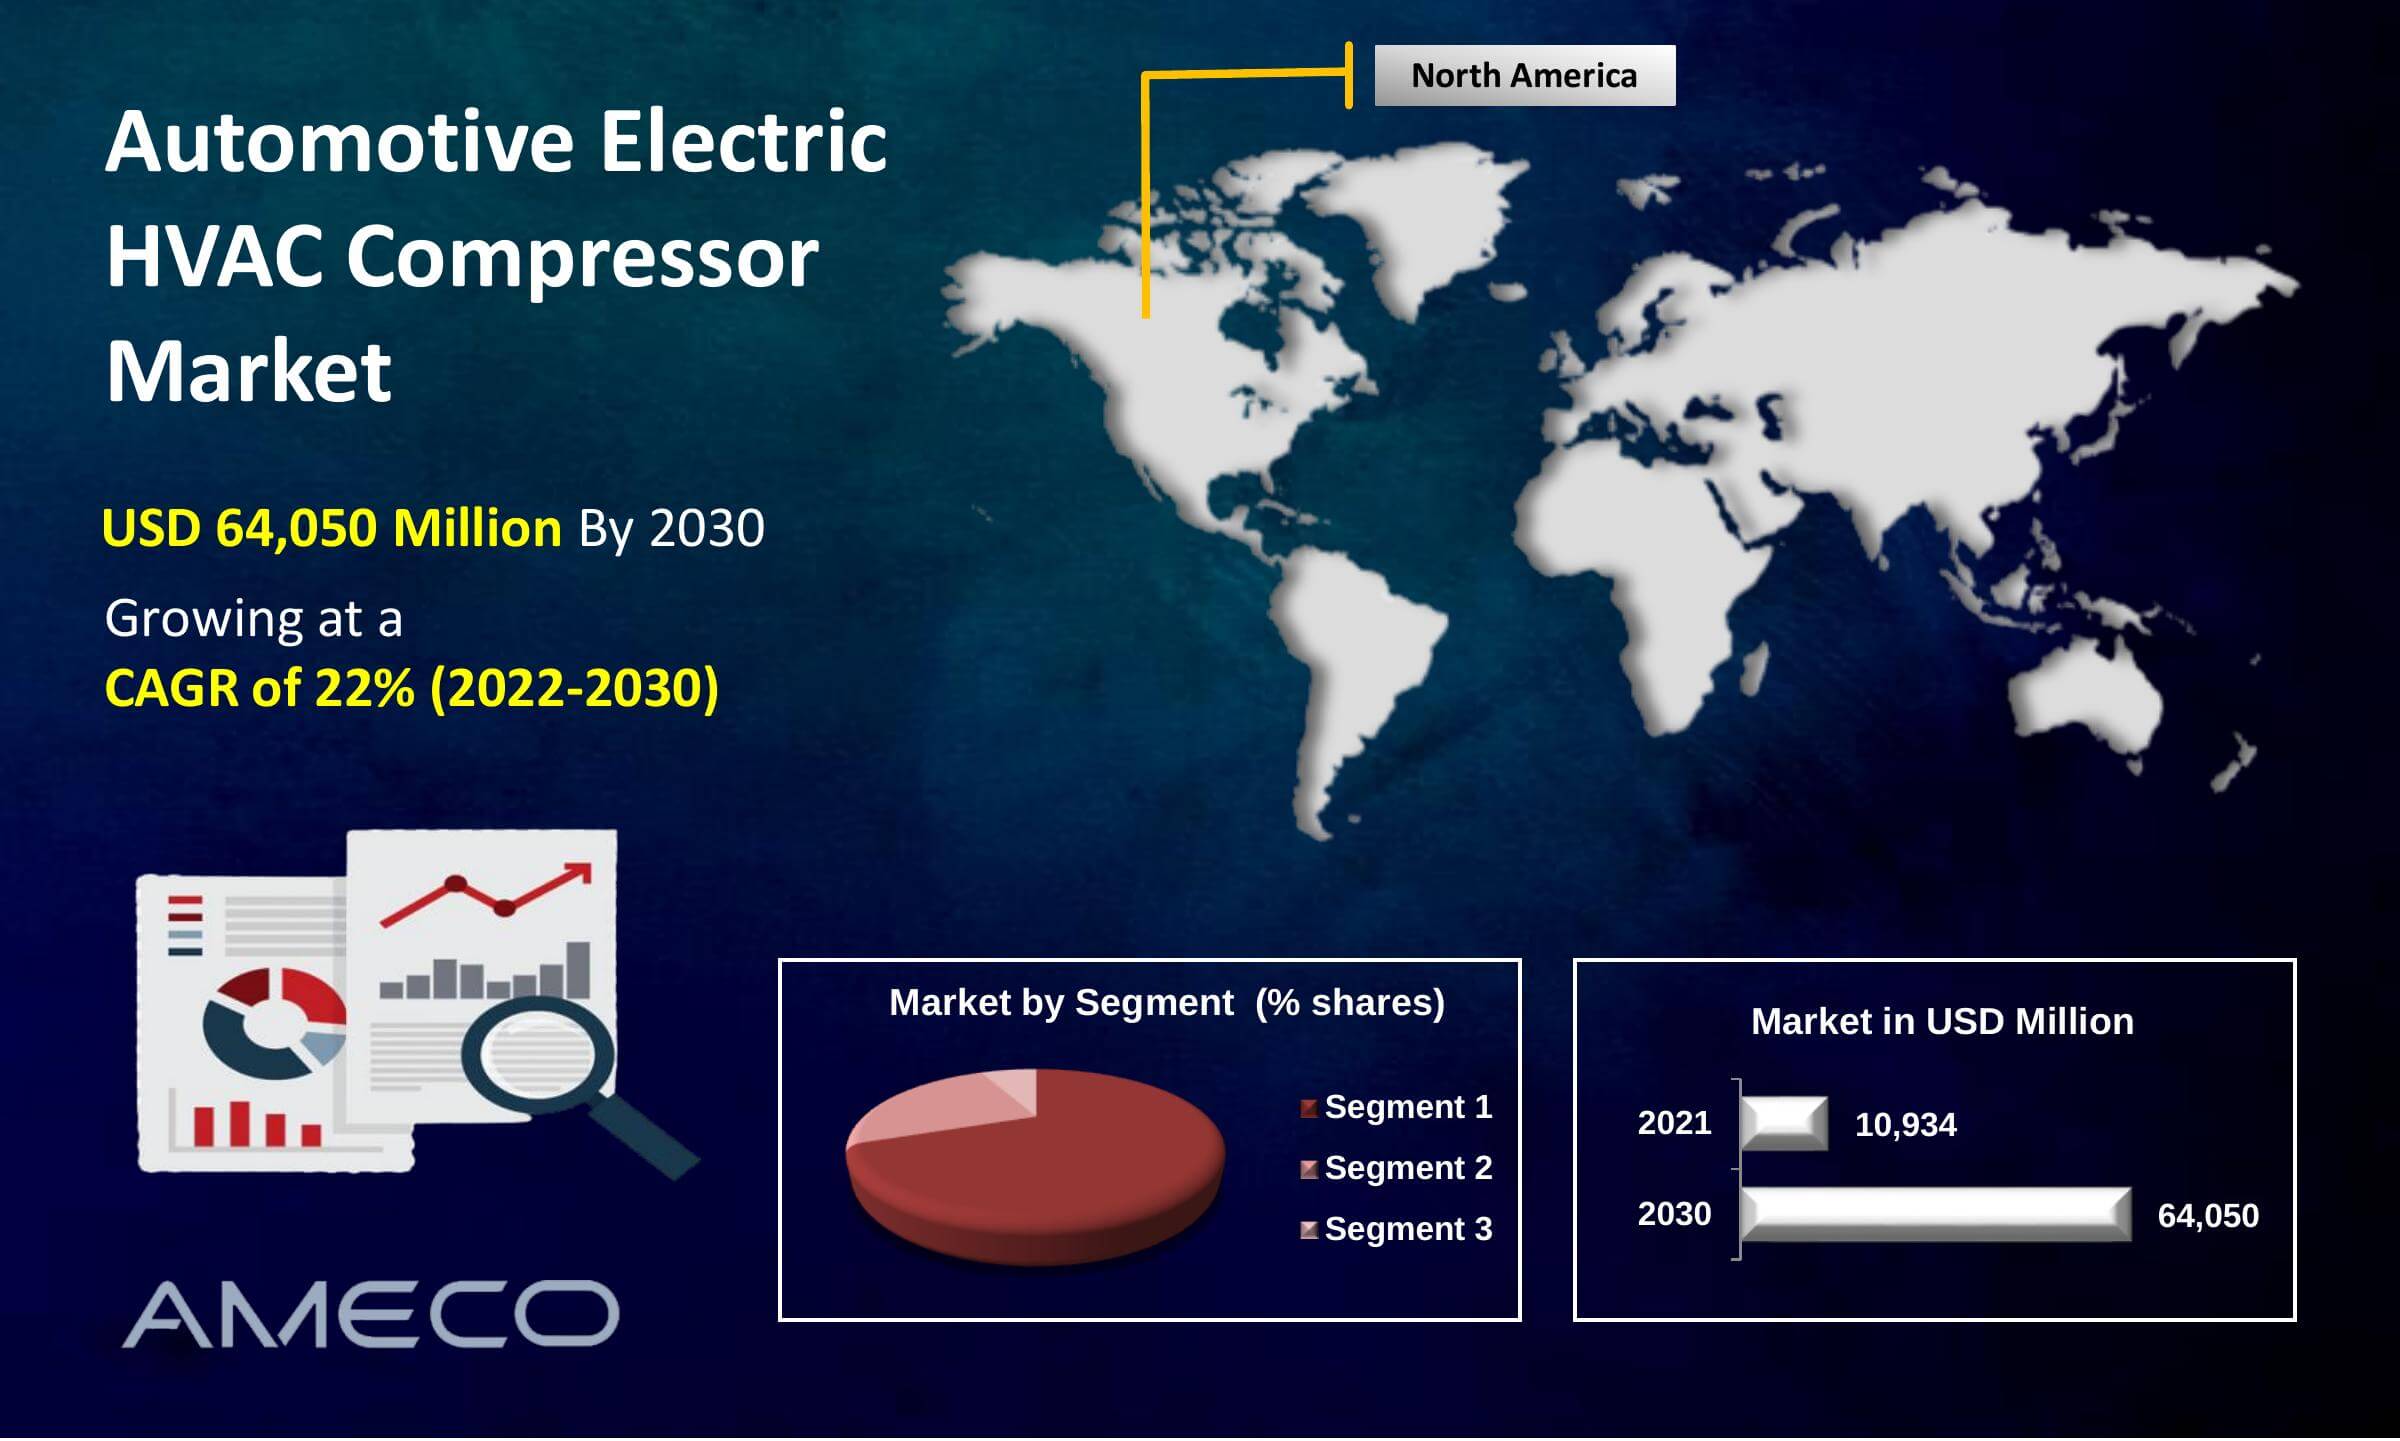 Automotive Electric HVAC Compressor Market Size, Share, Growth, Trends, and Forecast 2022-2030